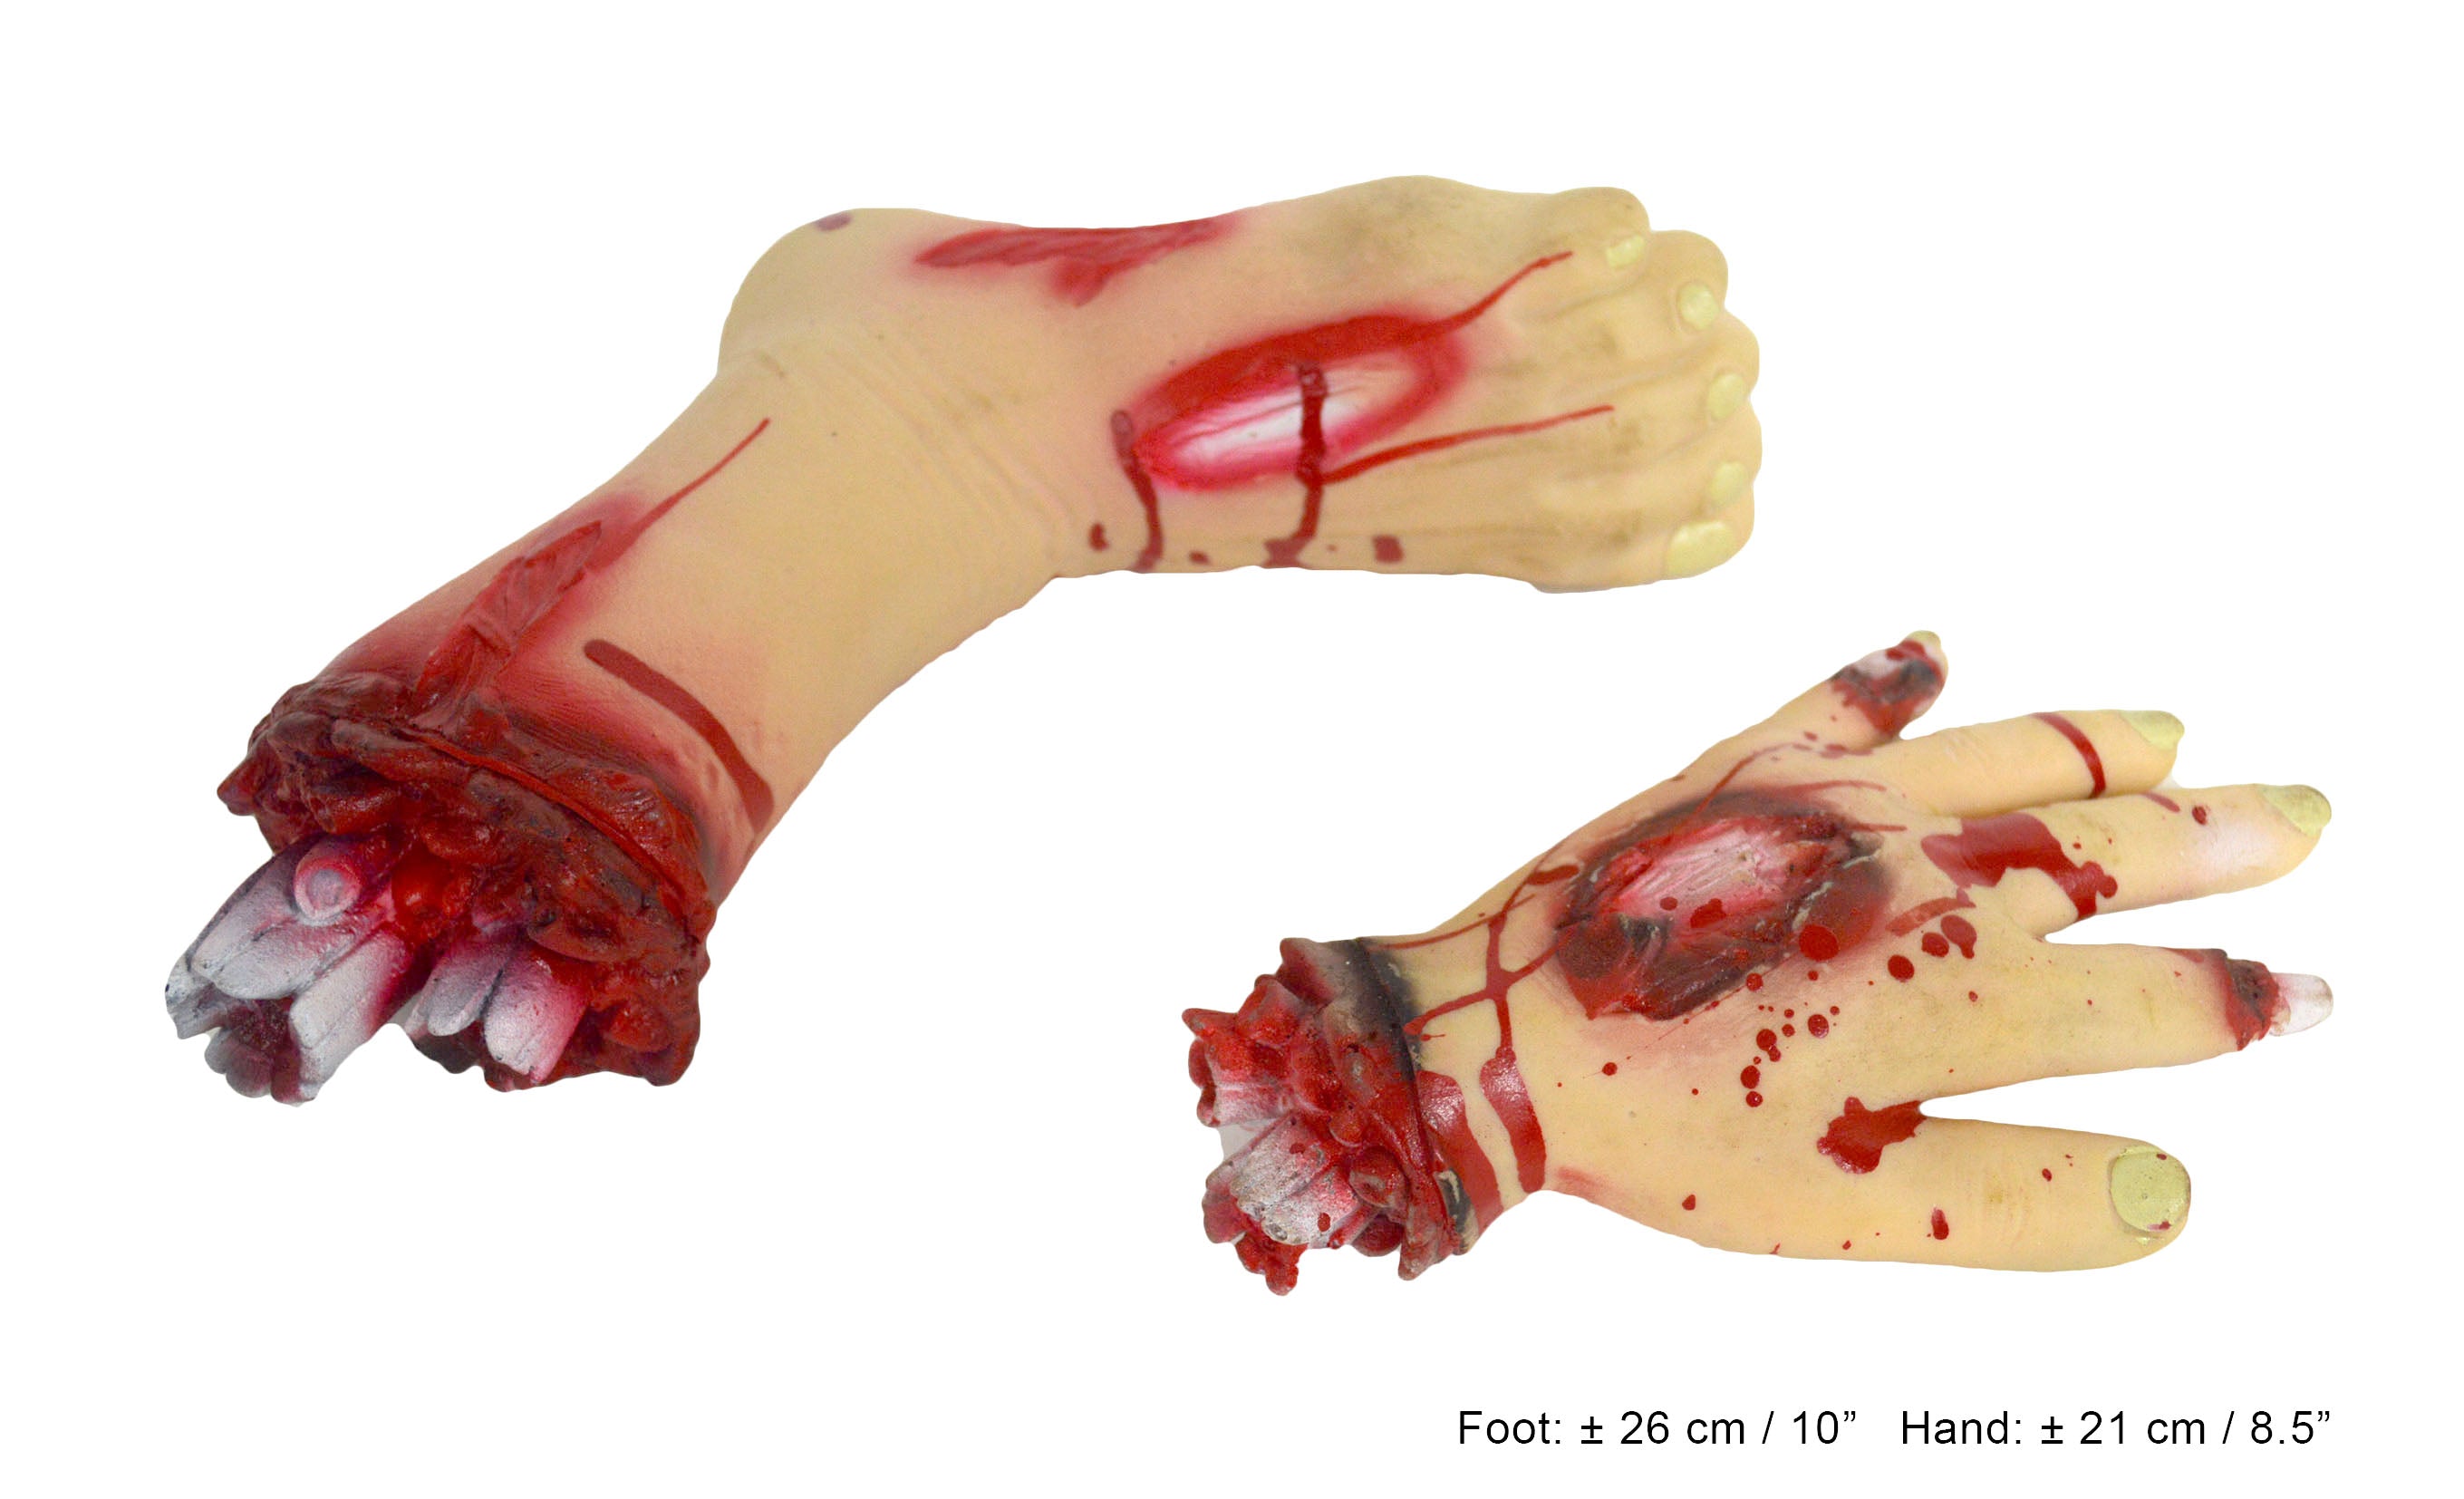 Severed Hand & Foot